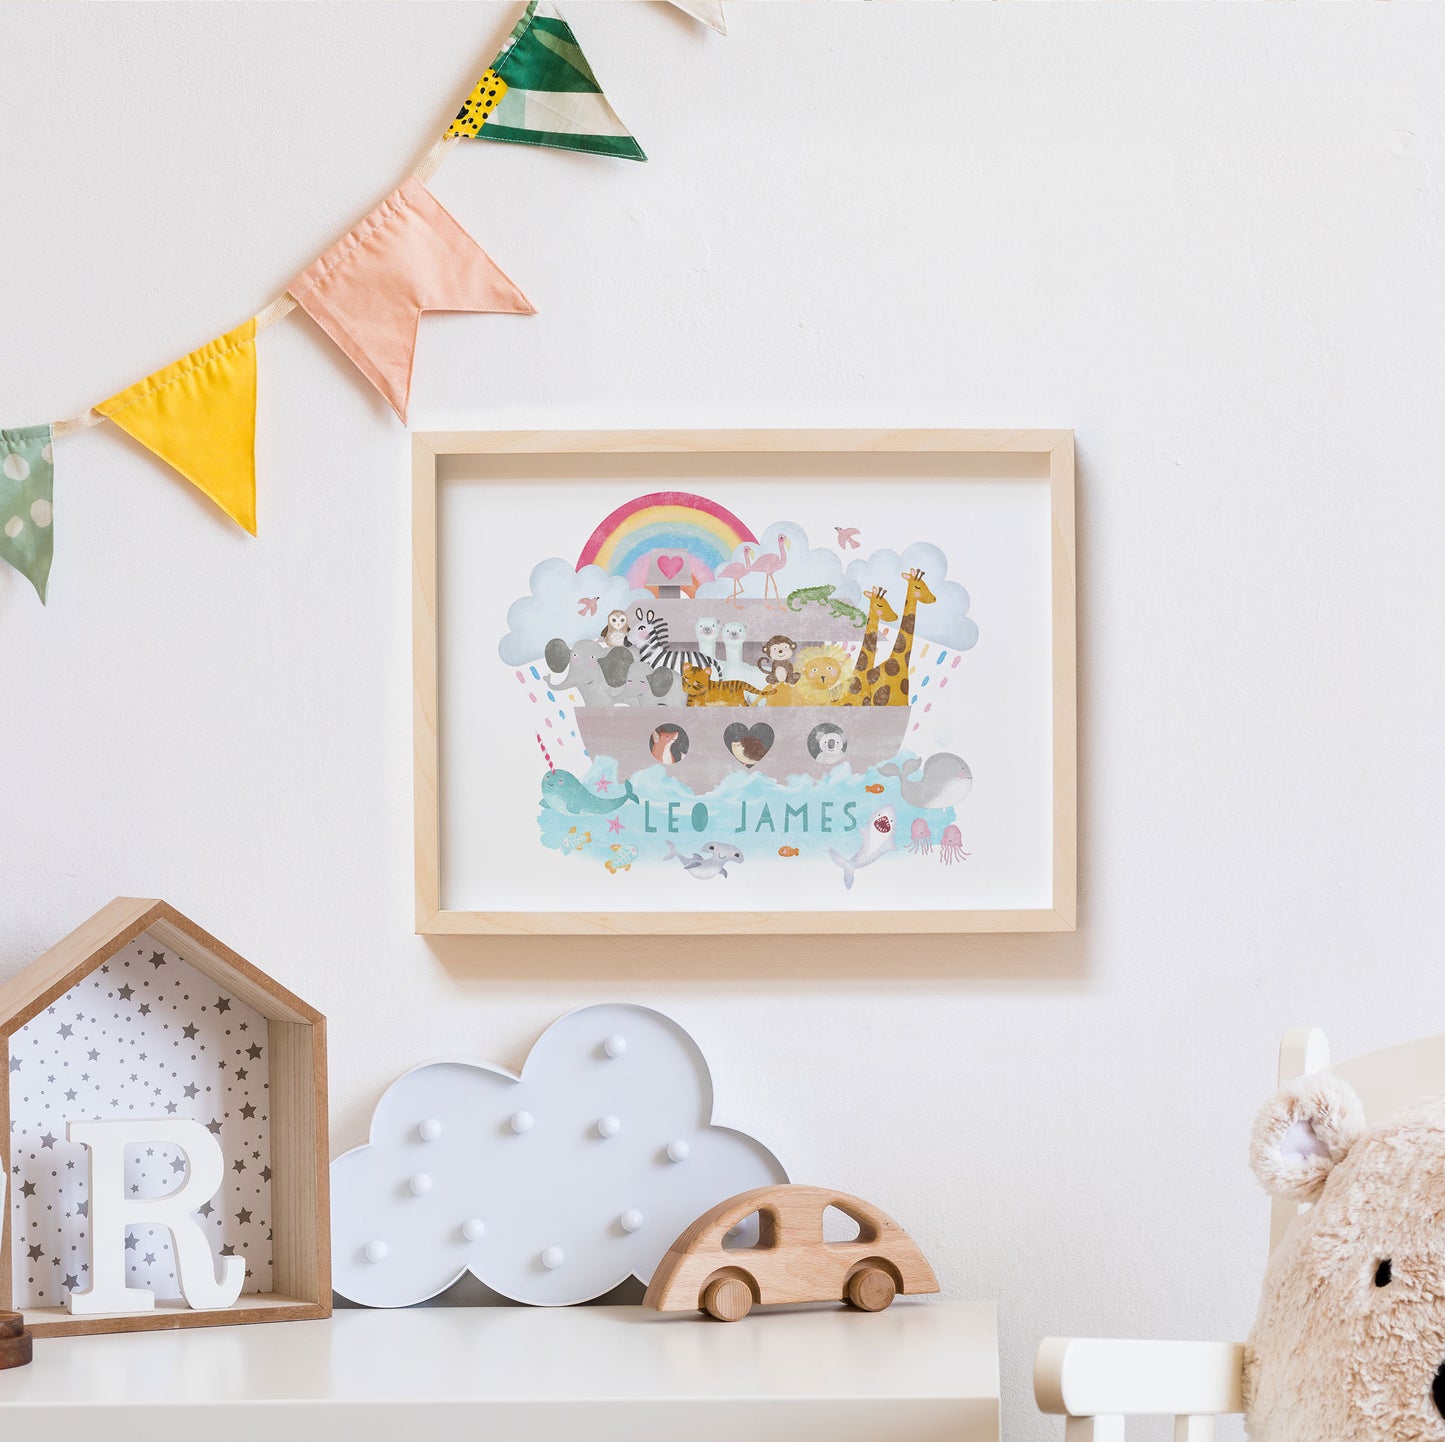 Noah's Ark Print. Nursery Childs Bedroom. New Baby Gift. Personalised Name Print. Child's Birthday Present. Naming Day Wall Art